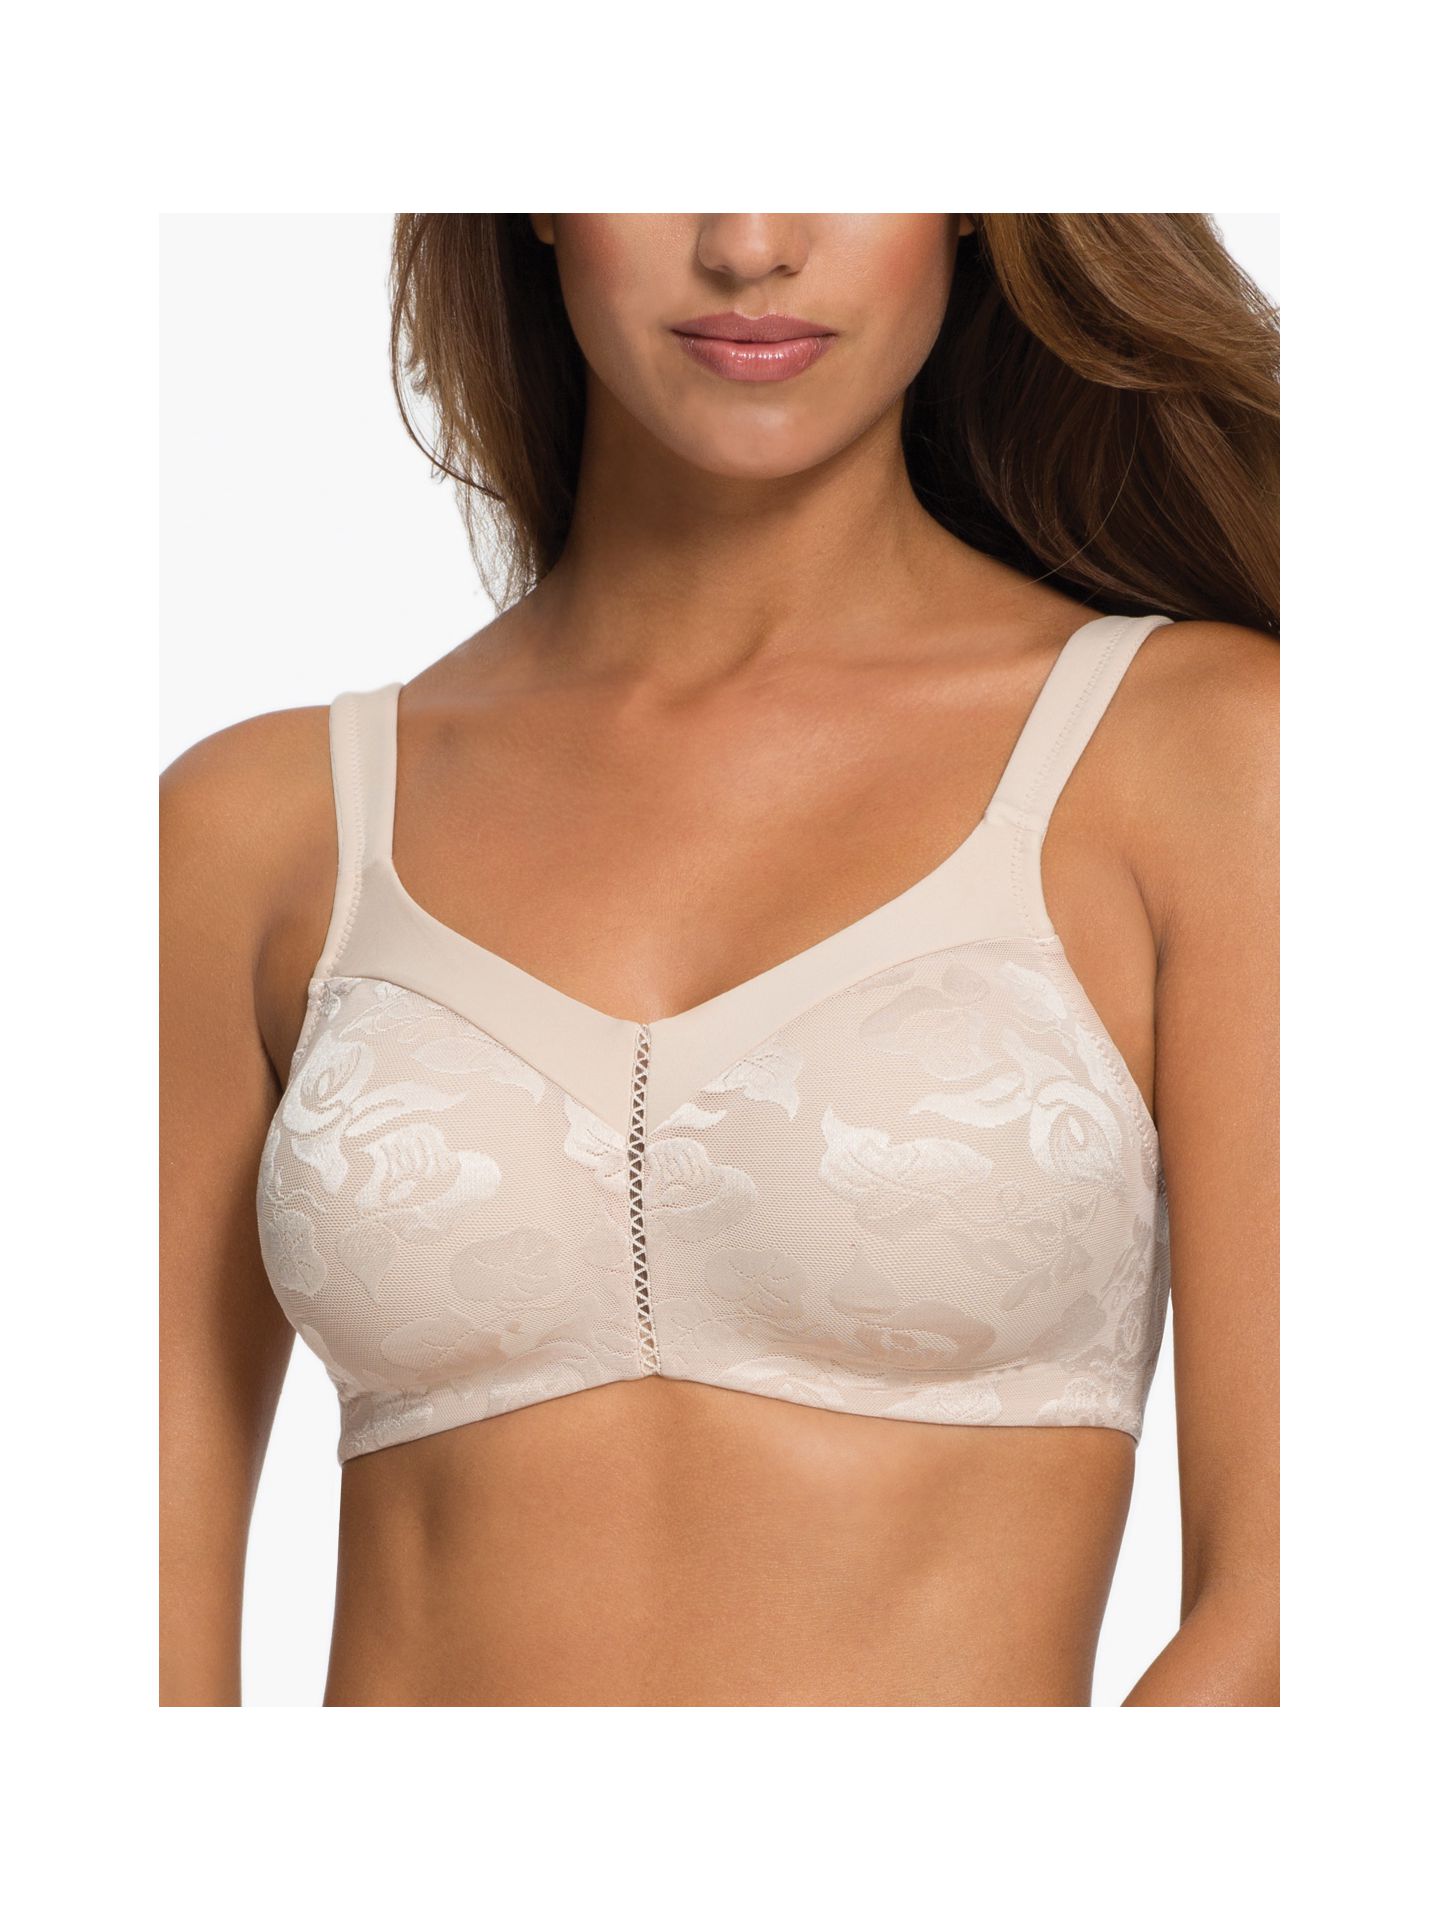 Wacoal 85276 Awareness Soft Cup Bra 36 DD Natural Nude 36dd for sale online